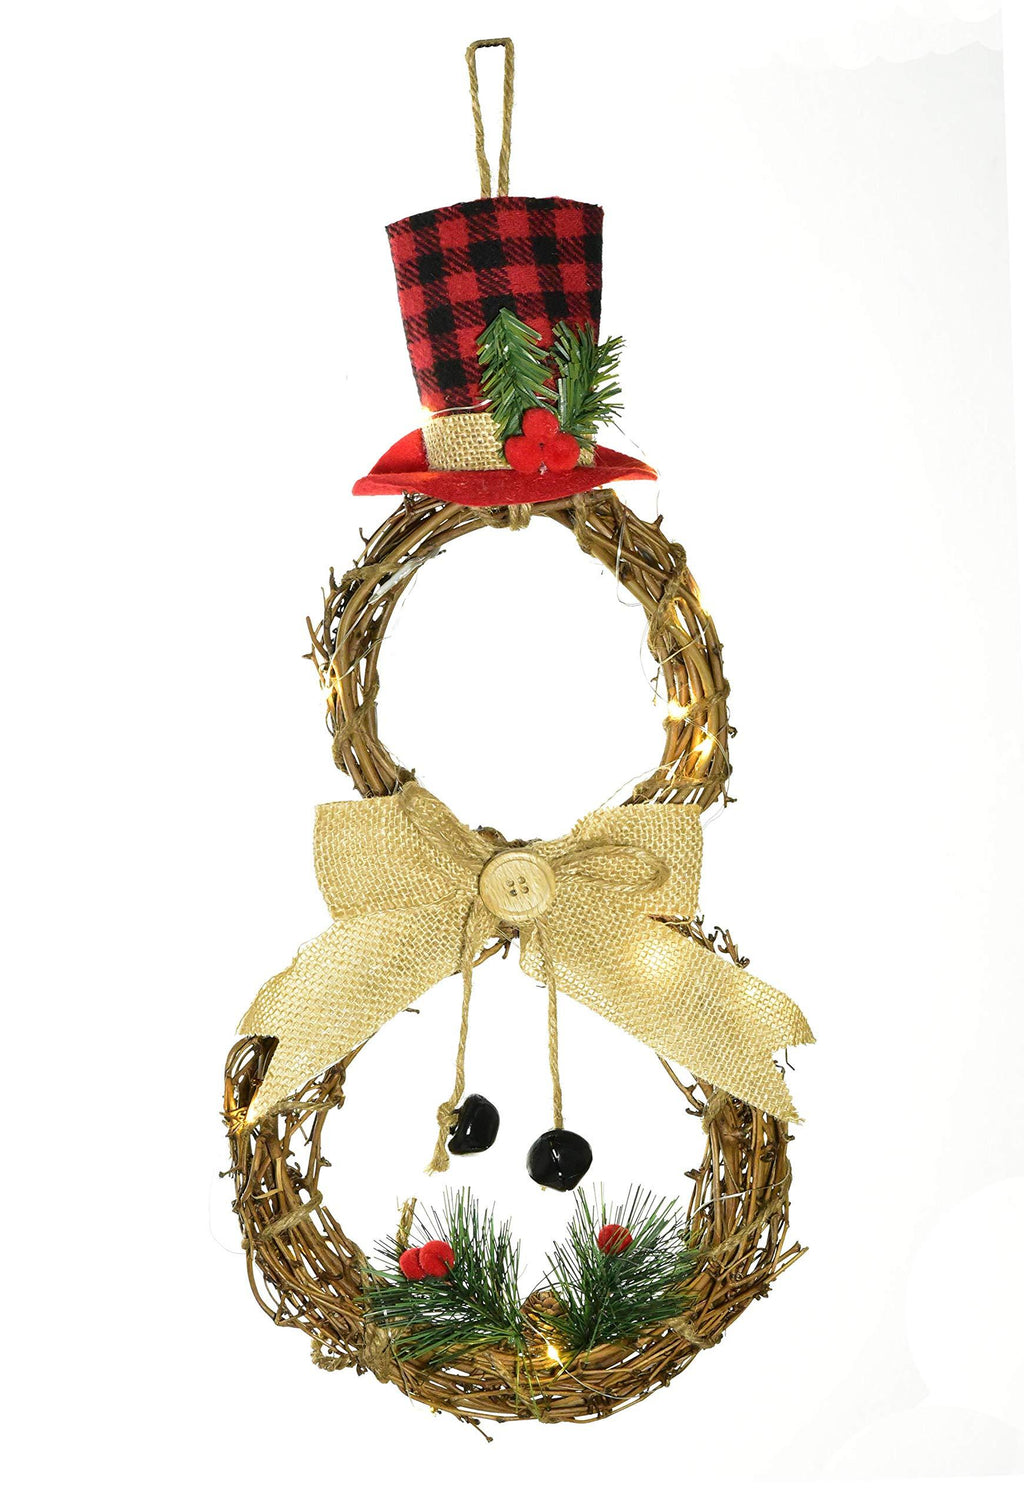  [AUSTRALIA] - Christmas Snowman Wreath Front Door Hanging Decor 16Inch Xmas Wreath Grapevine Wreath for Holiday Christmas Decorations